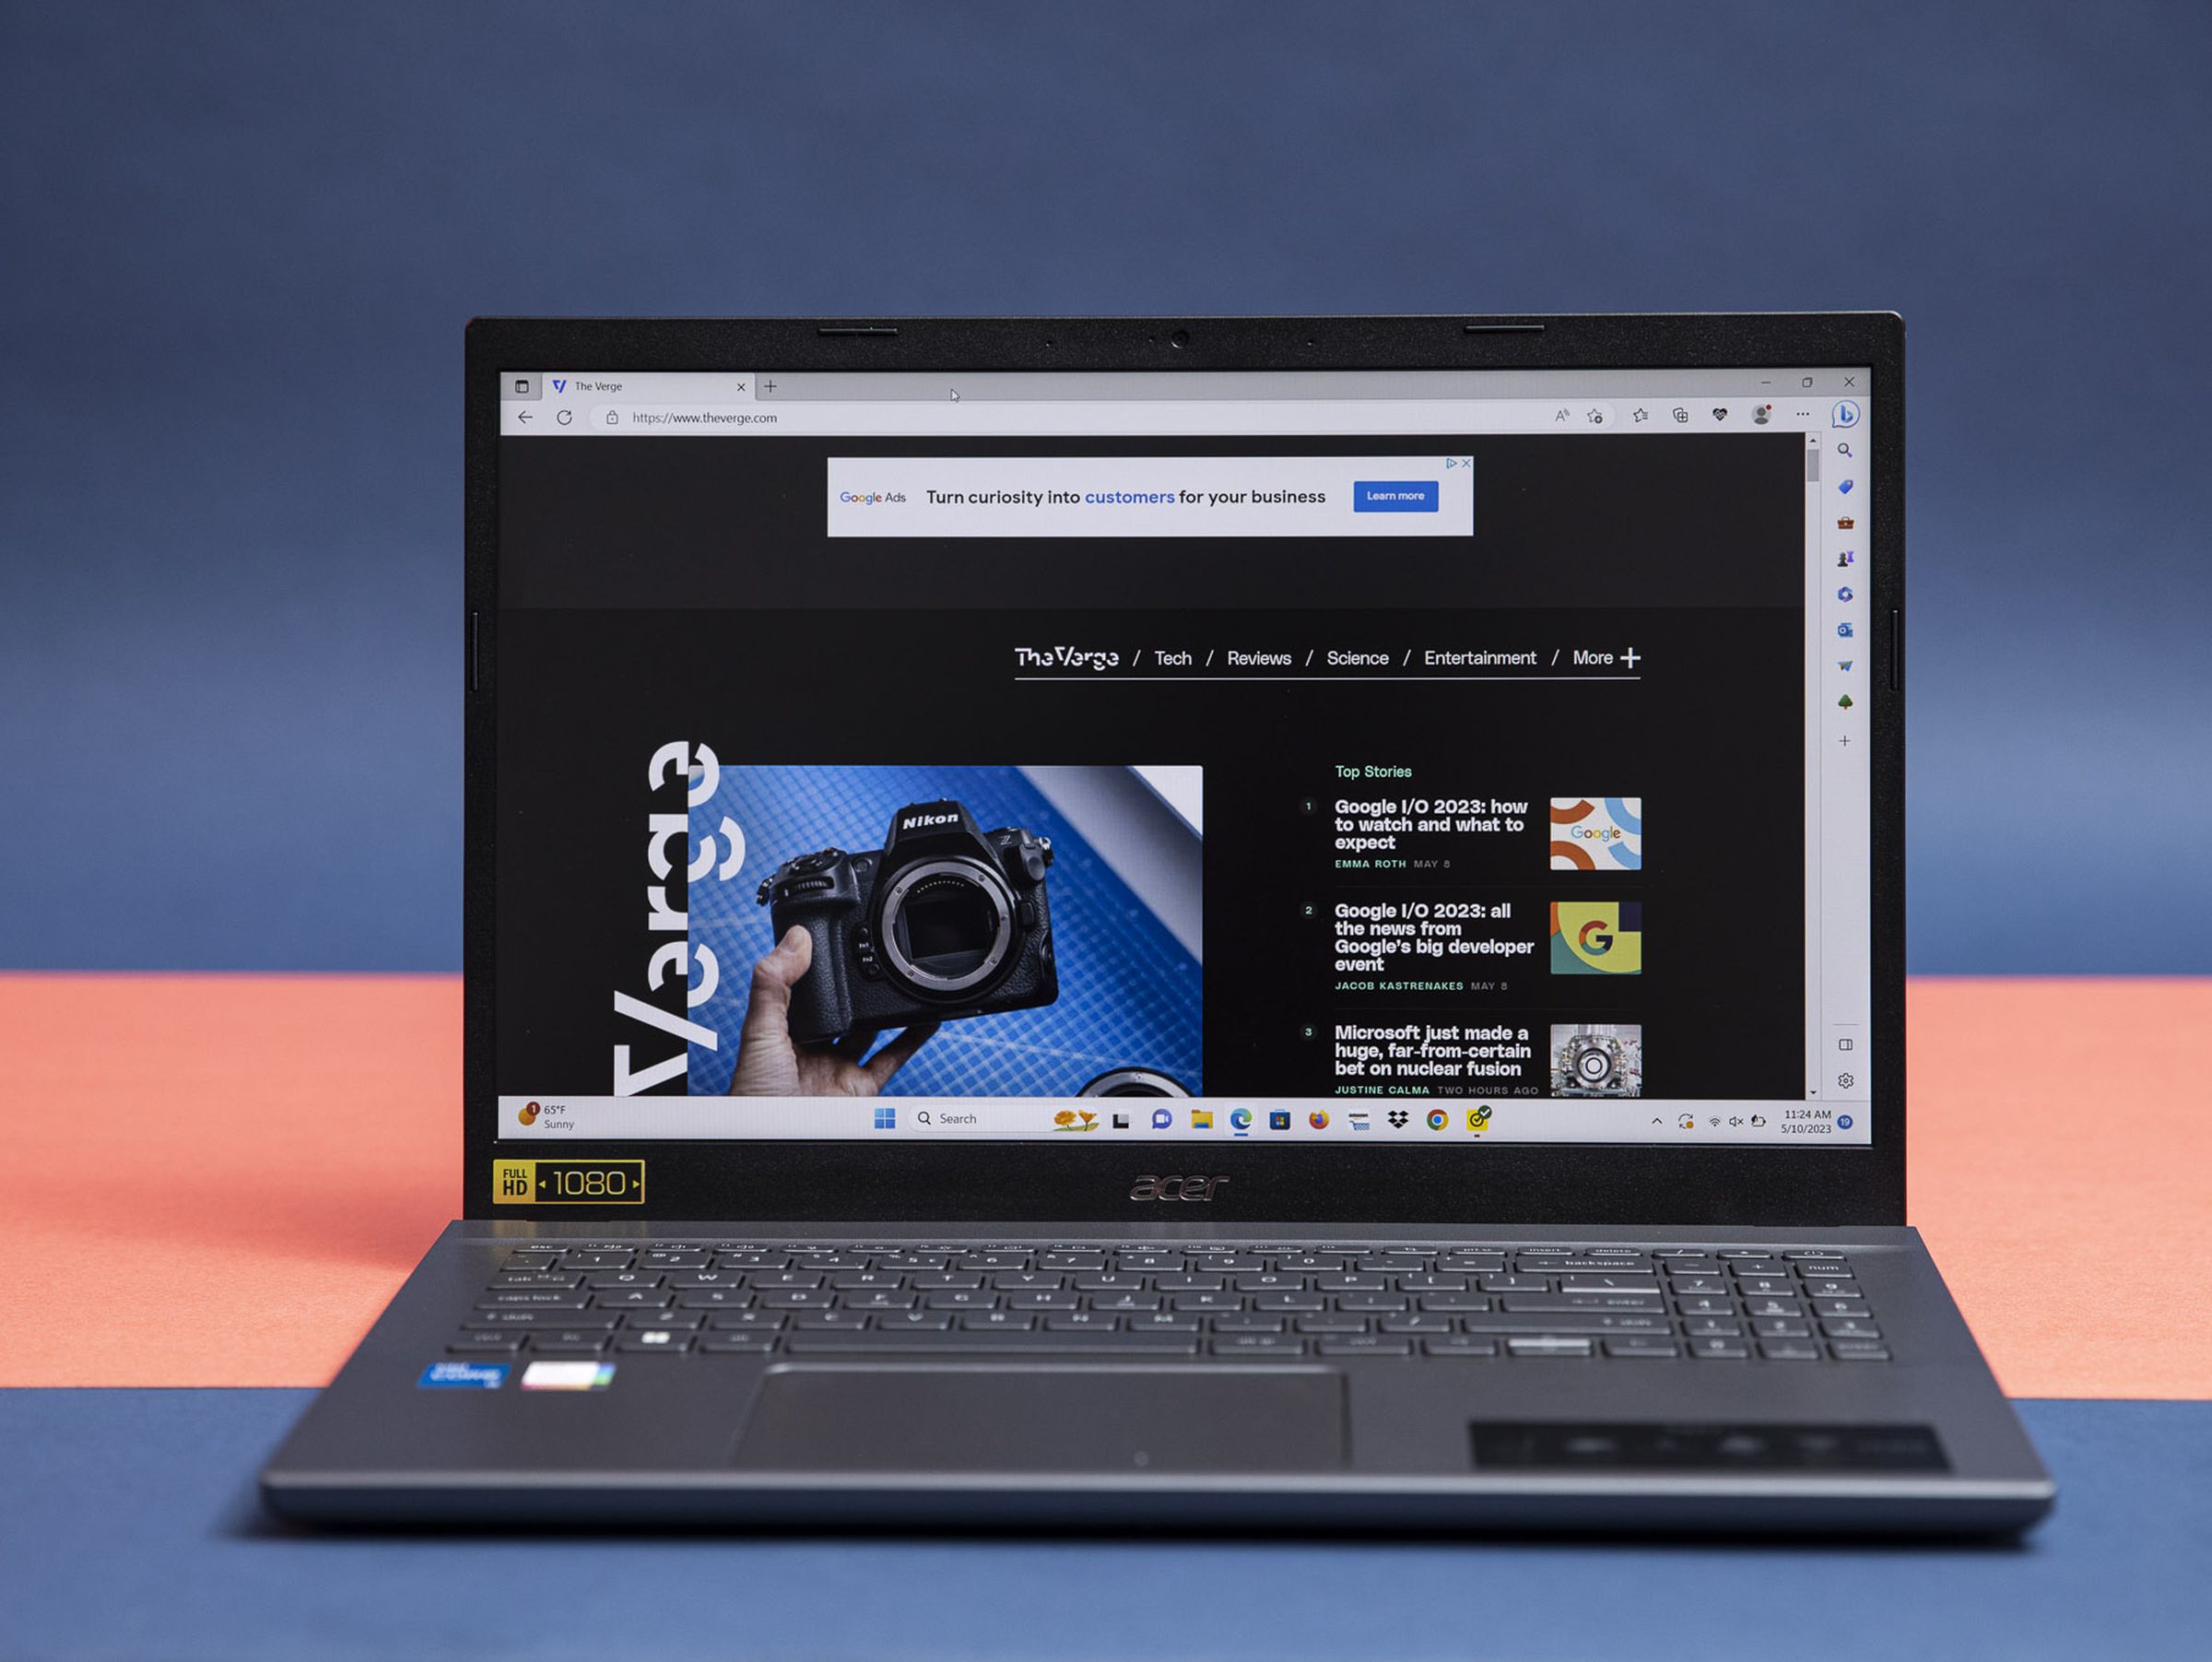 The Acer Aspire 5 displaying The Verge homepage.